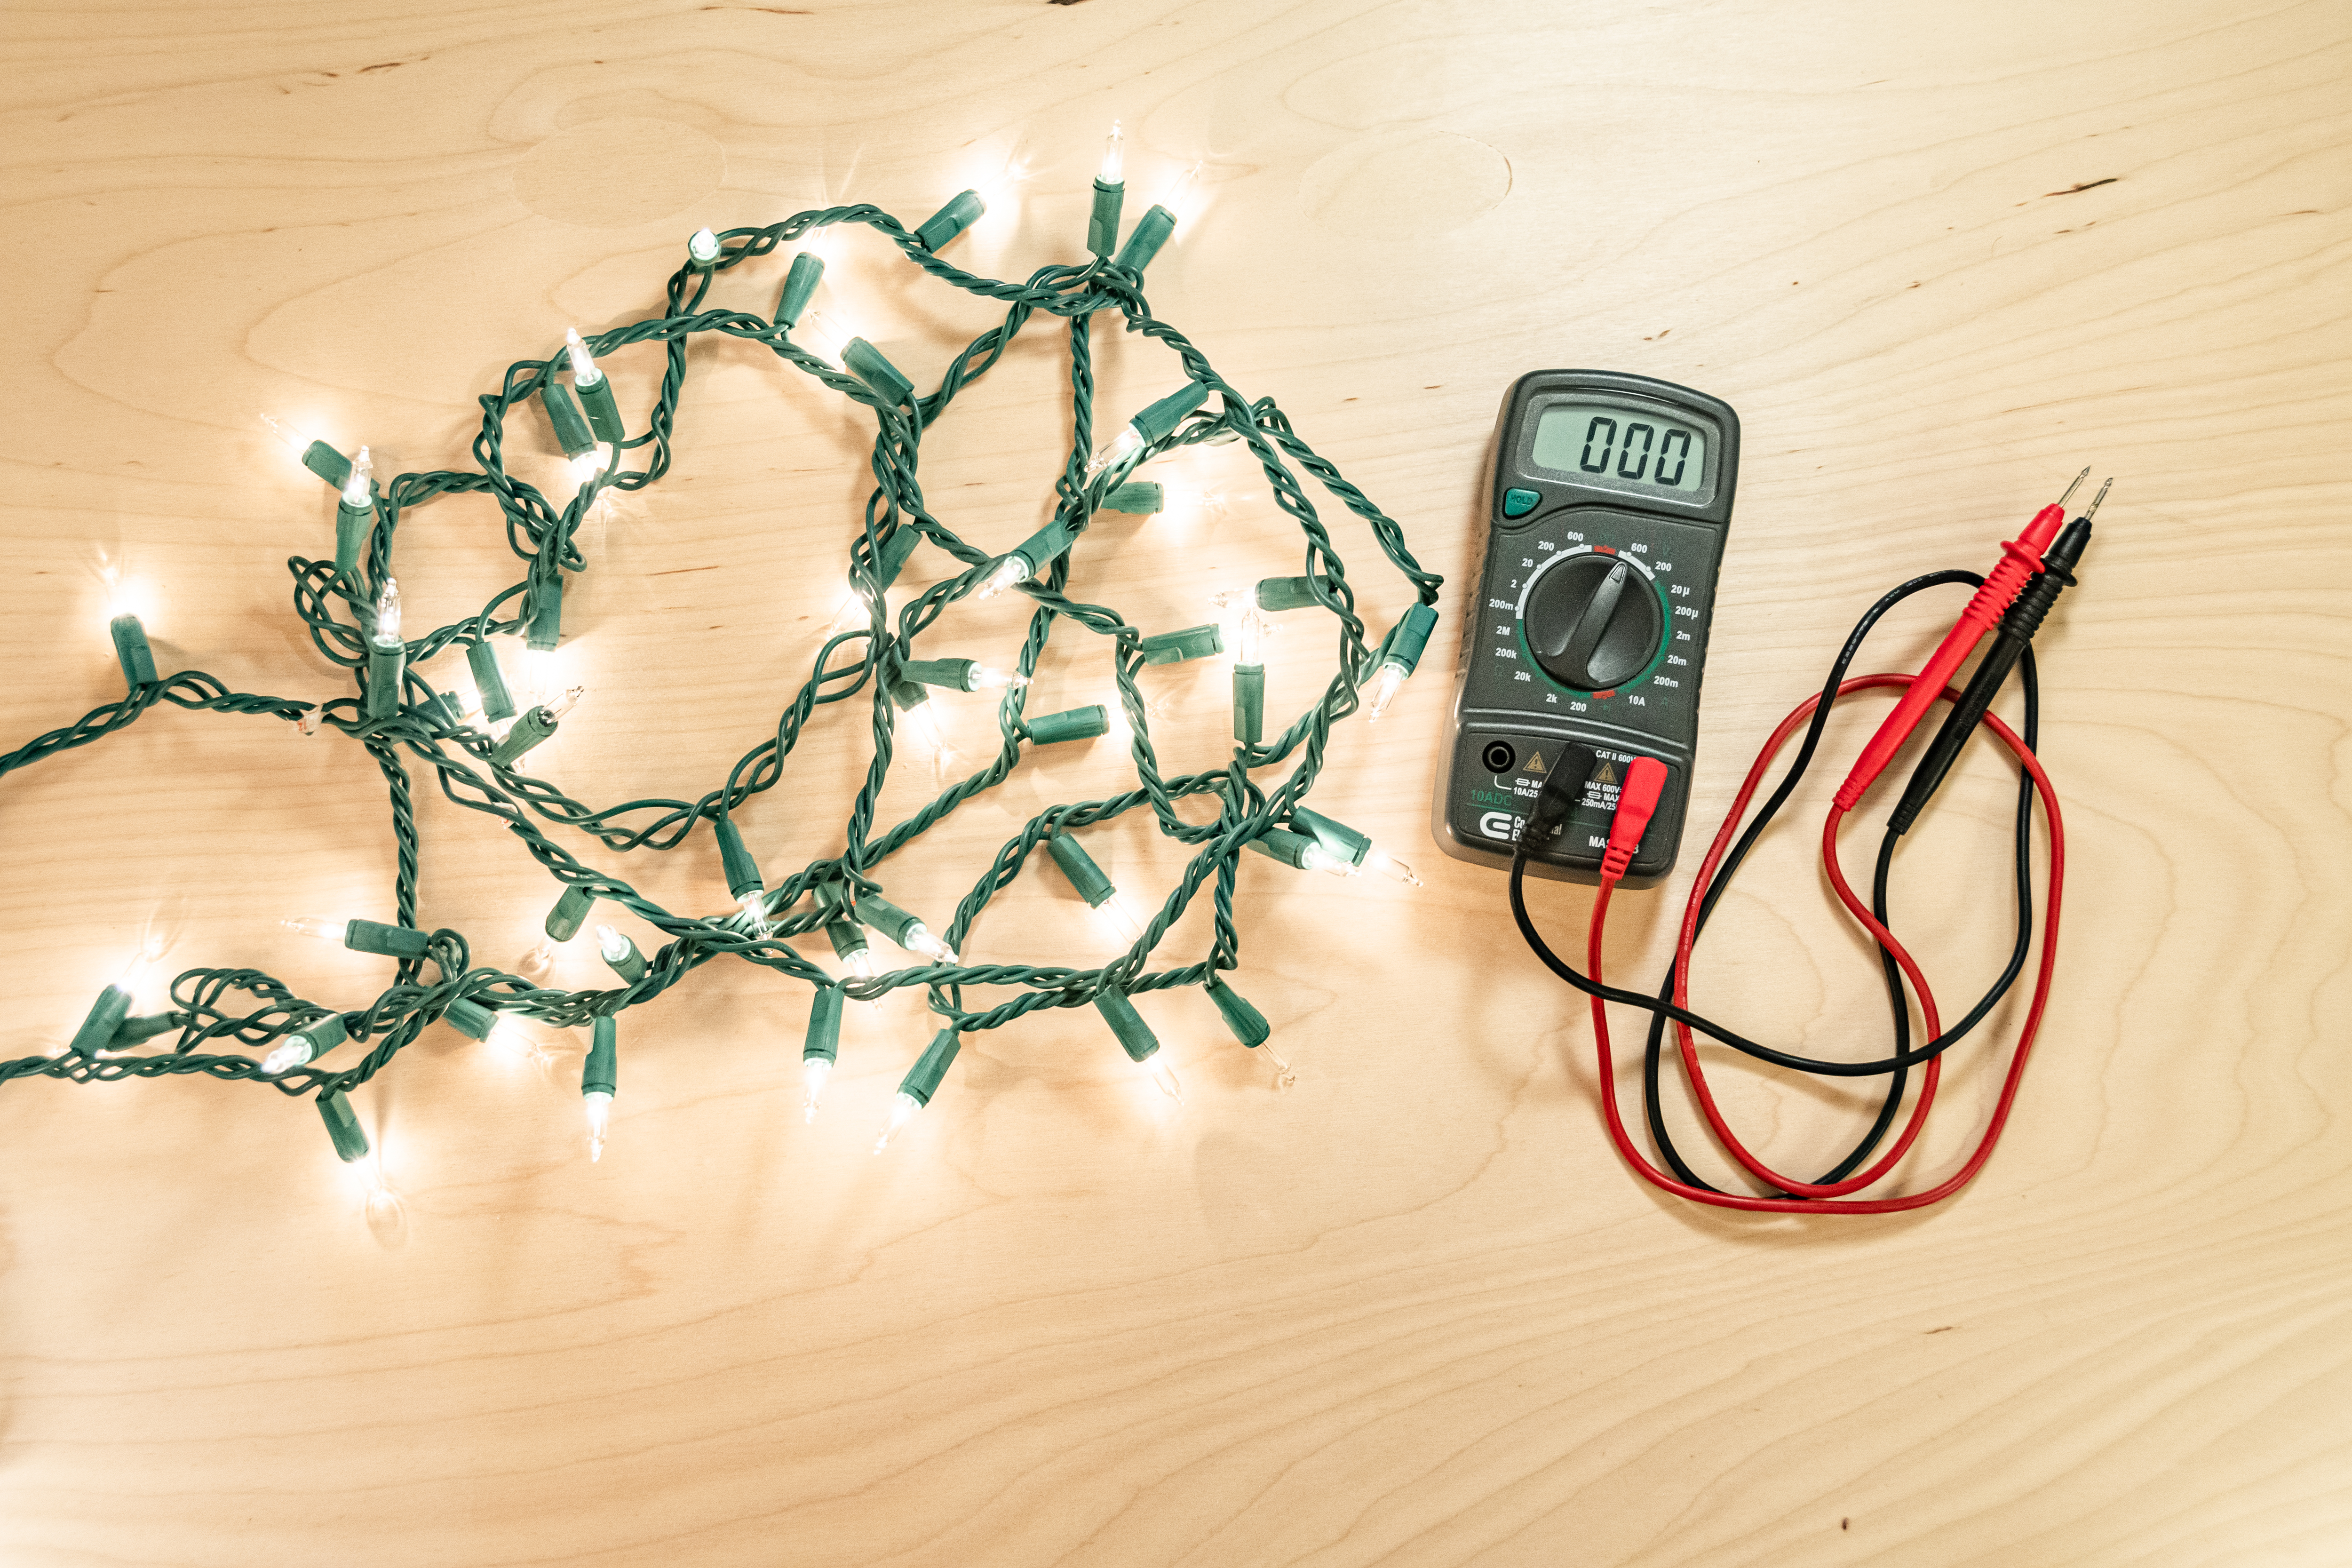 Changing a Fuse in Christmas Lights: What Do You Need and How to Do It